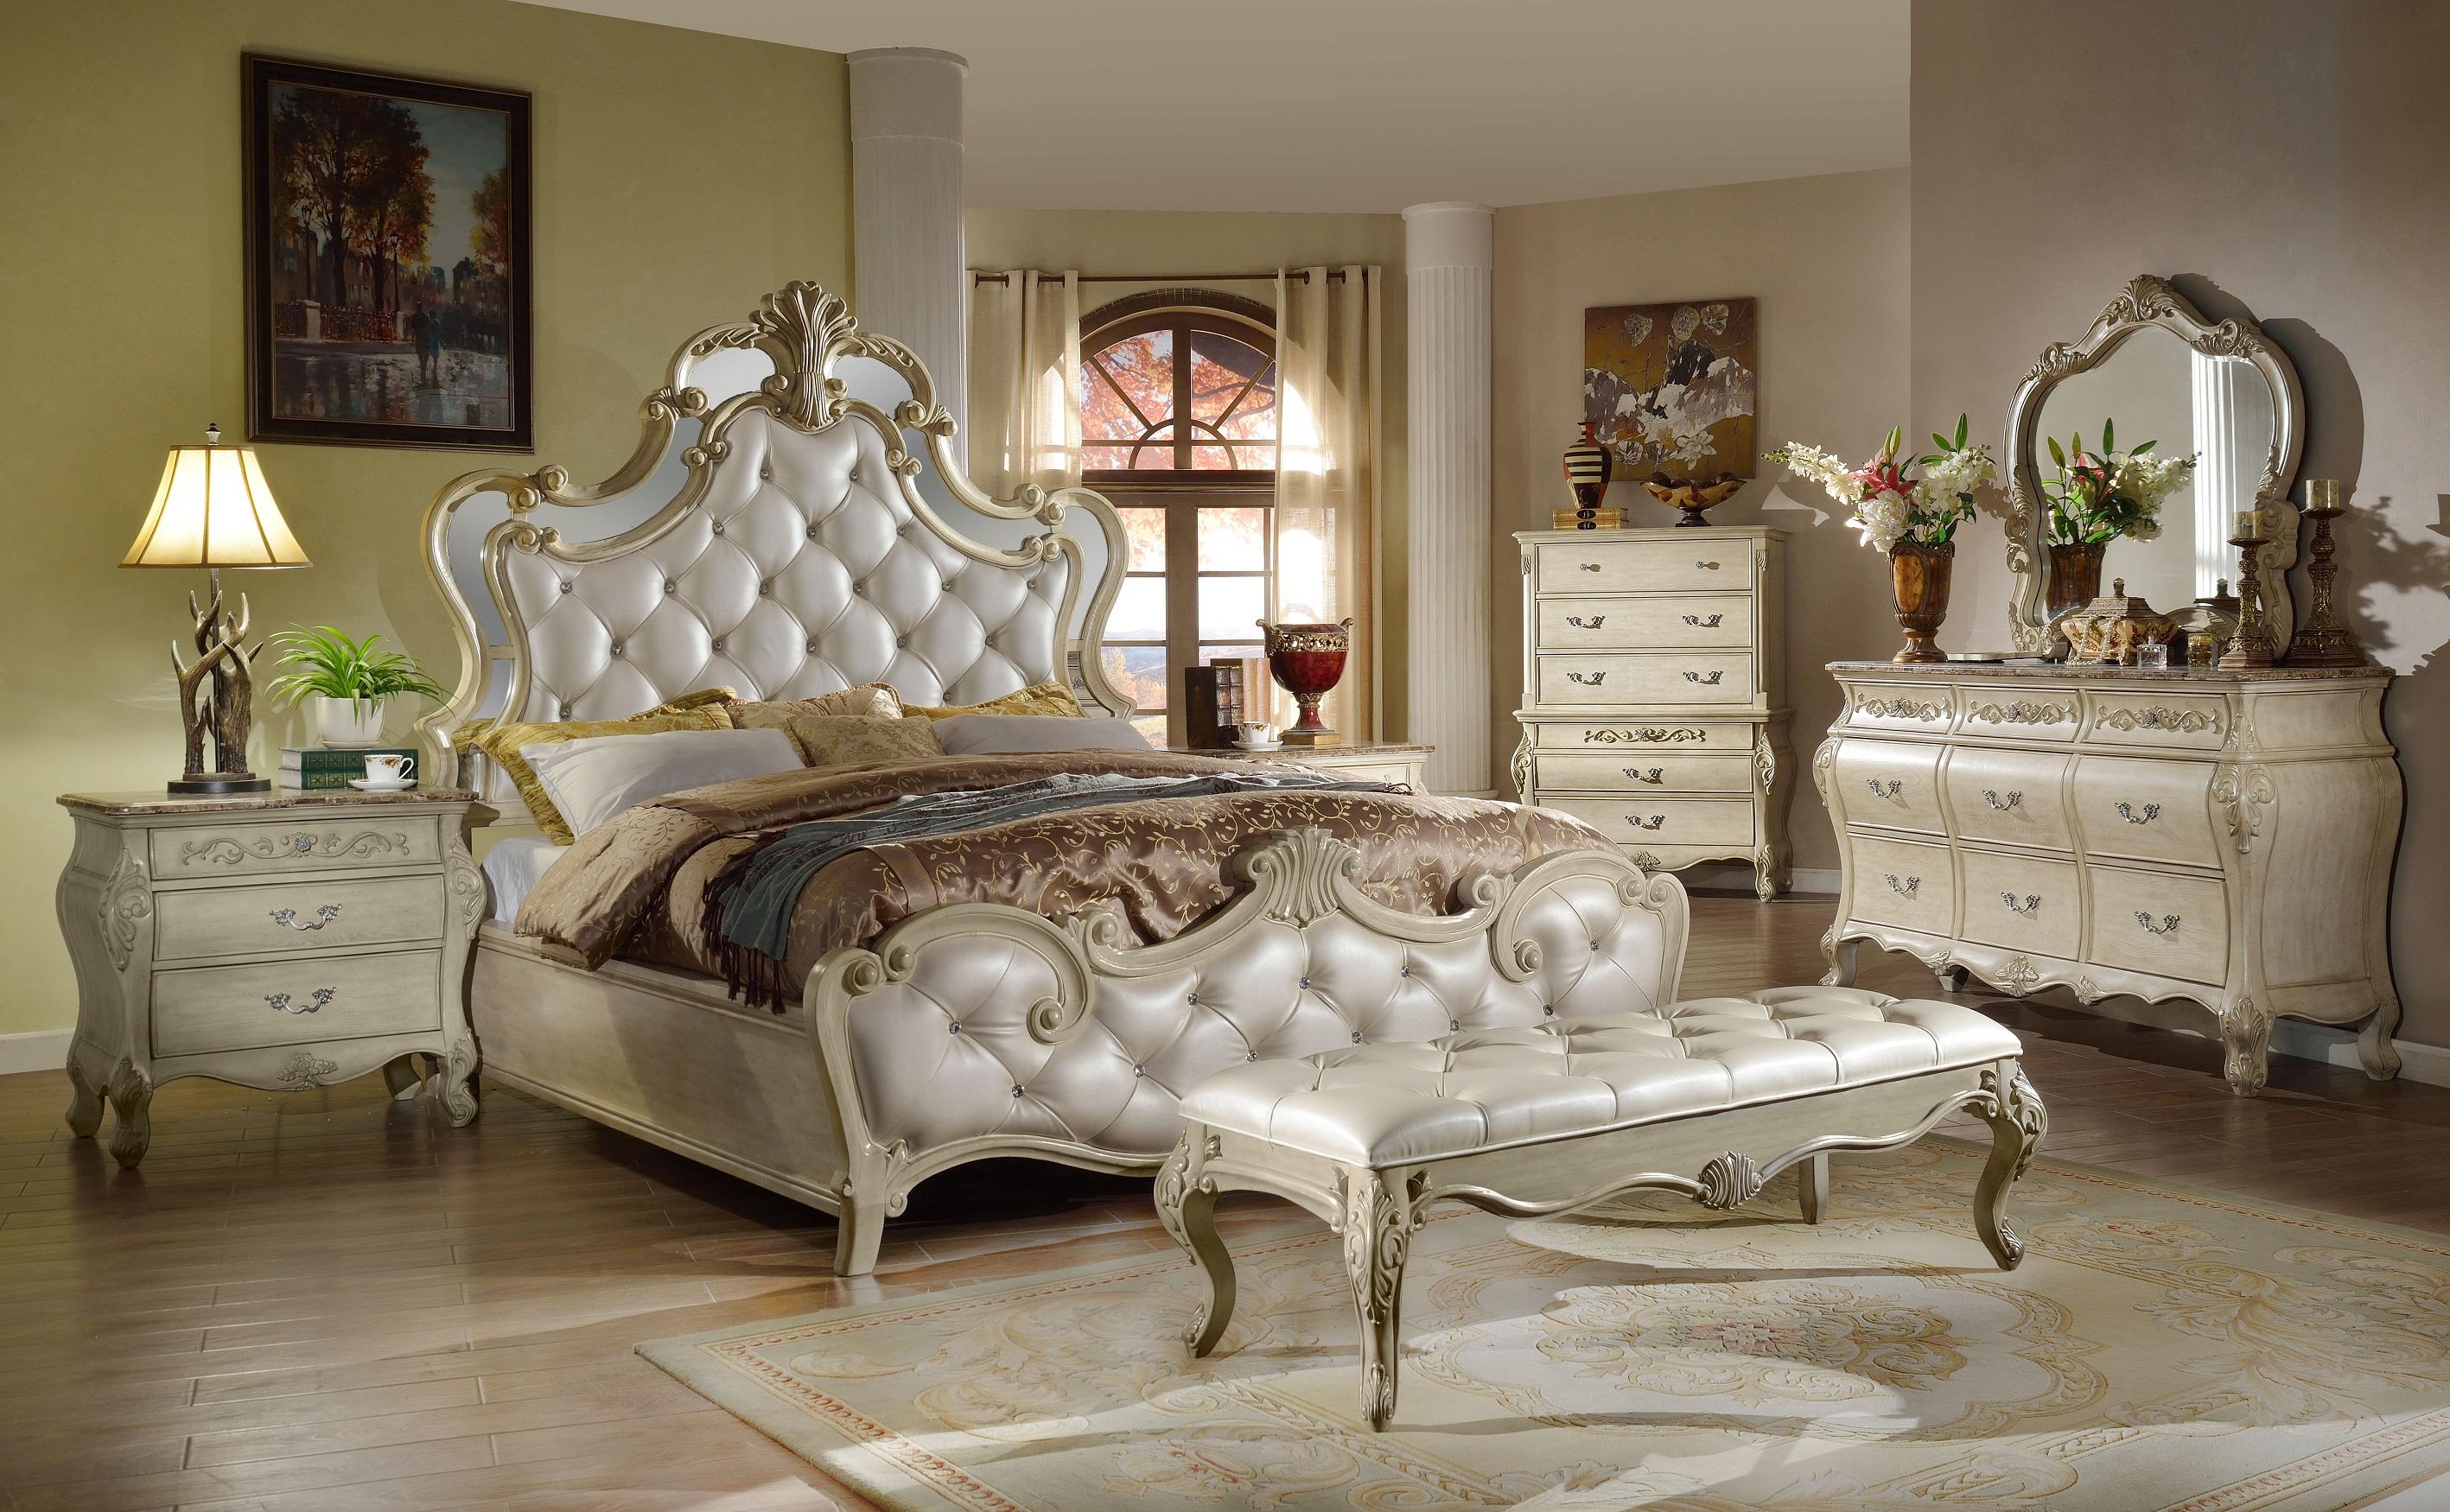 

    
McFerran B8305 Antique White Glamour Crystal Tufted Fabric Queen Bedroom Set 5Pcs
